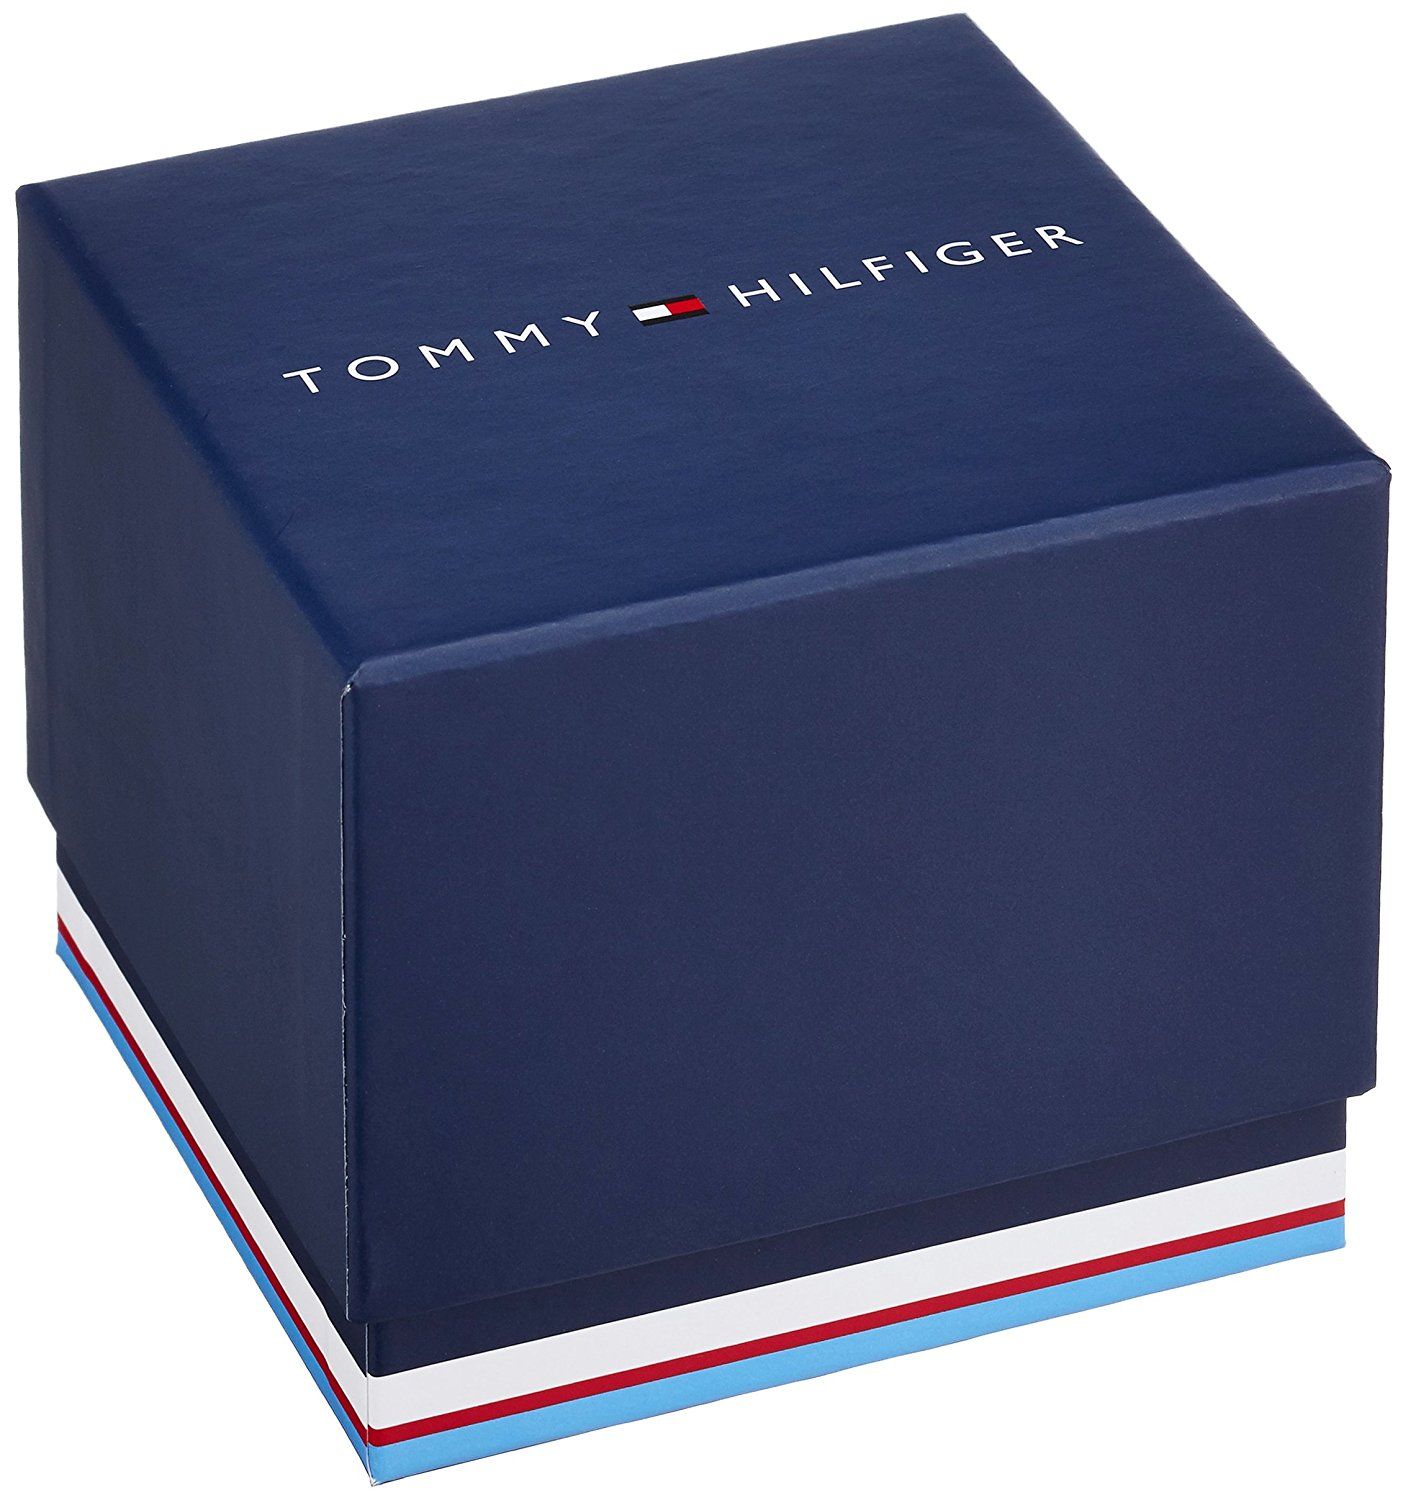 This Tommy Hilfiger Jimmy Multi Dial Watch for Men is the perfect timepiece to wear or to gift. It's Black 44 mm Round case combined with the comfortable Black Stainless steel watch band will ensure you enjoy this stunning timepiece without any compromise. Operated by a high quality Quartz movement and water resistant to 5 bars, your watch will keep ticking. This fashionable watch with numbers on the bezel is a perfect gift for New Year, birthday,valentine's day and so on-The watch has a calendar function: Day-Date, 24-hour Display High quality 21 cm length and 21 mm width Black Stainless Steel strap with a Fold over with push button clasp Case diameter: 44 mm,case thickness: 10 mm, case colour: Black and dial colour: Black